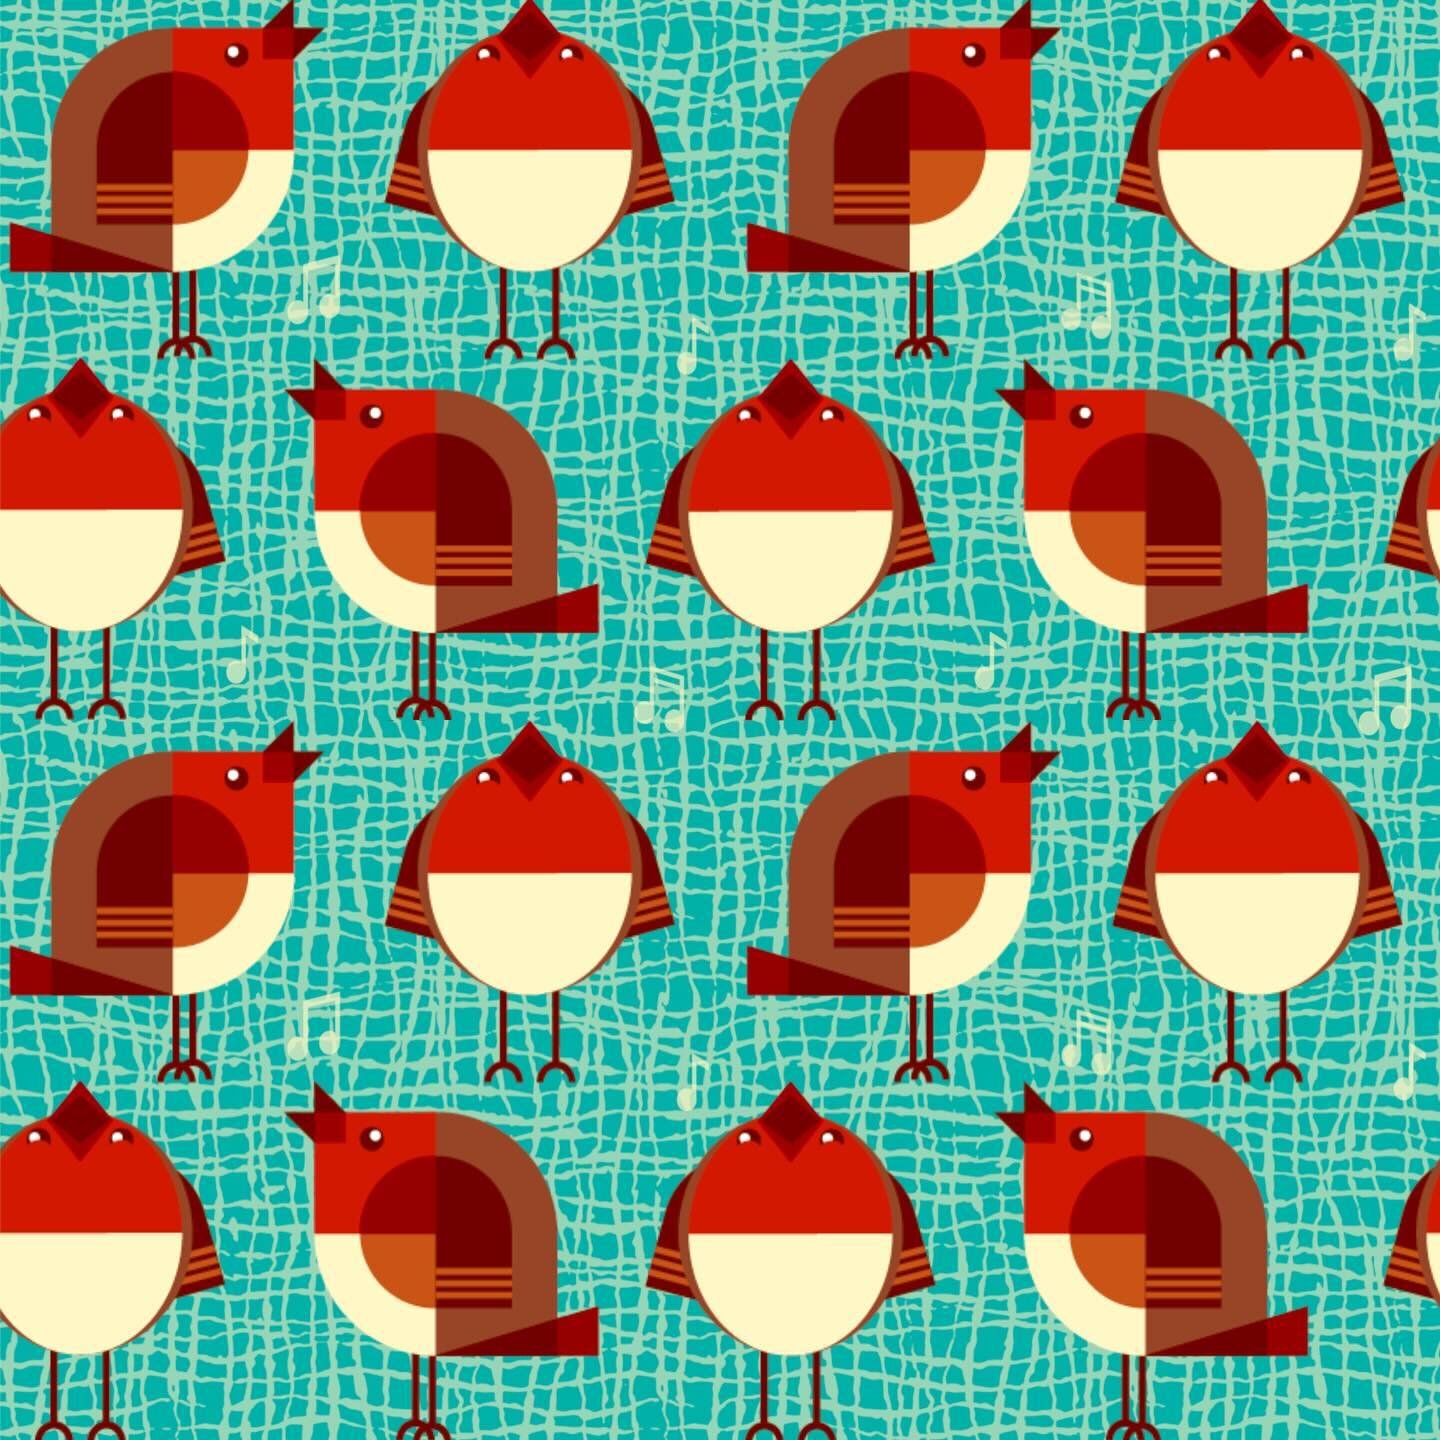 Inspired by our Mum, Robin, who we called Ruby, these cheerful MidMod style birds emerged over the holidays. Visit the link in my bio to see this and enjoy the many fabulous entries for this week&rsquo;s #spoonflower design challenge, Welcoming Walls